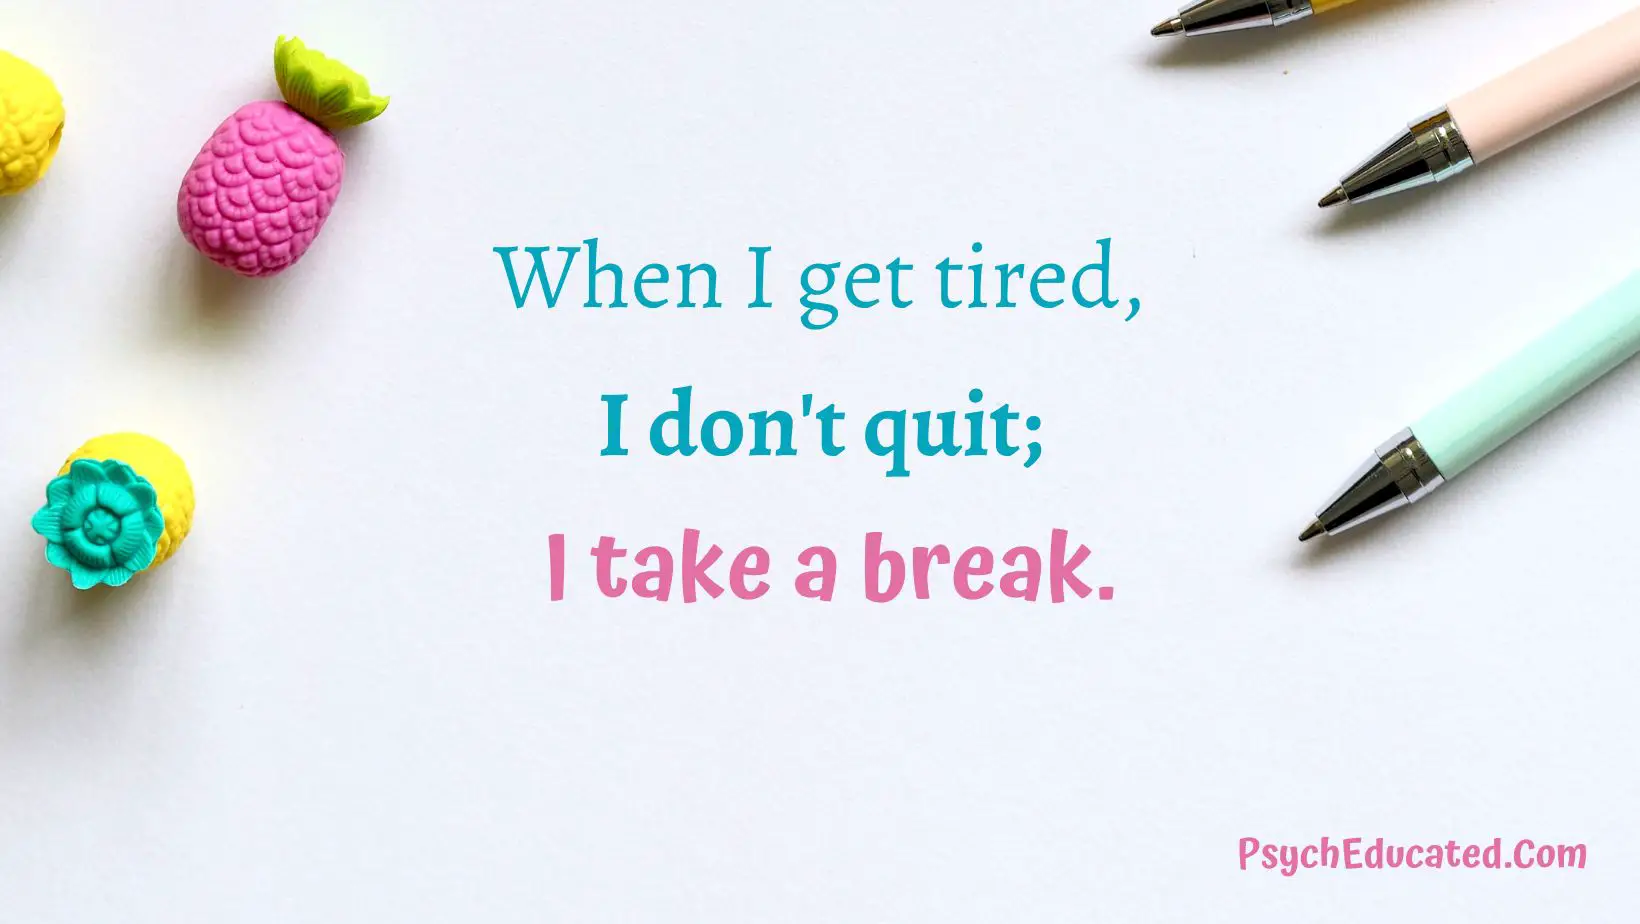 When I get tired I don't quit I take a break. positive affirmation to achieve goals